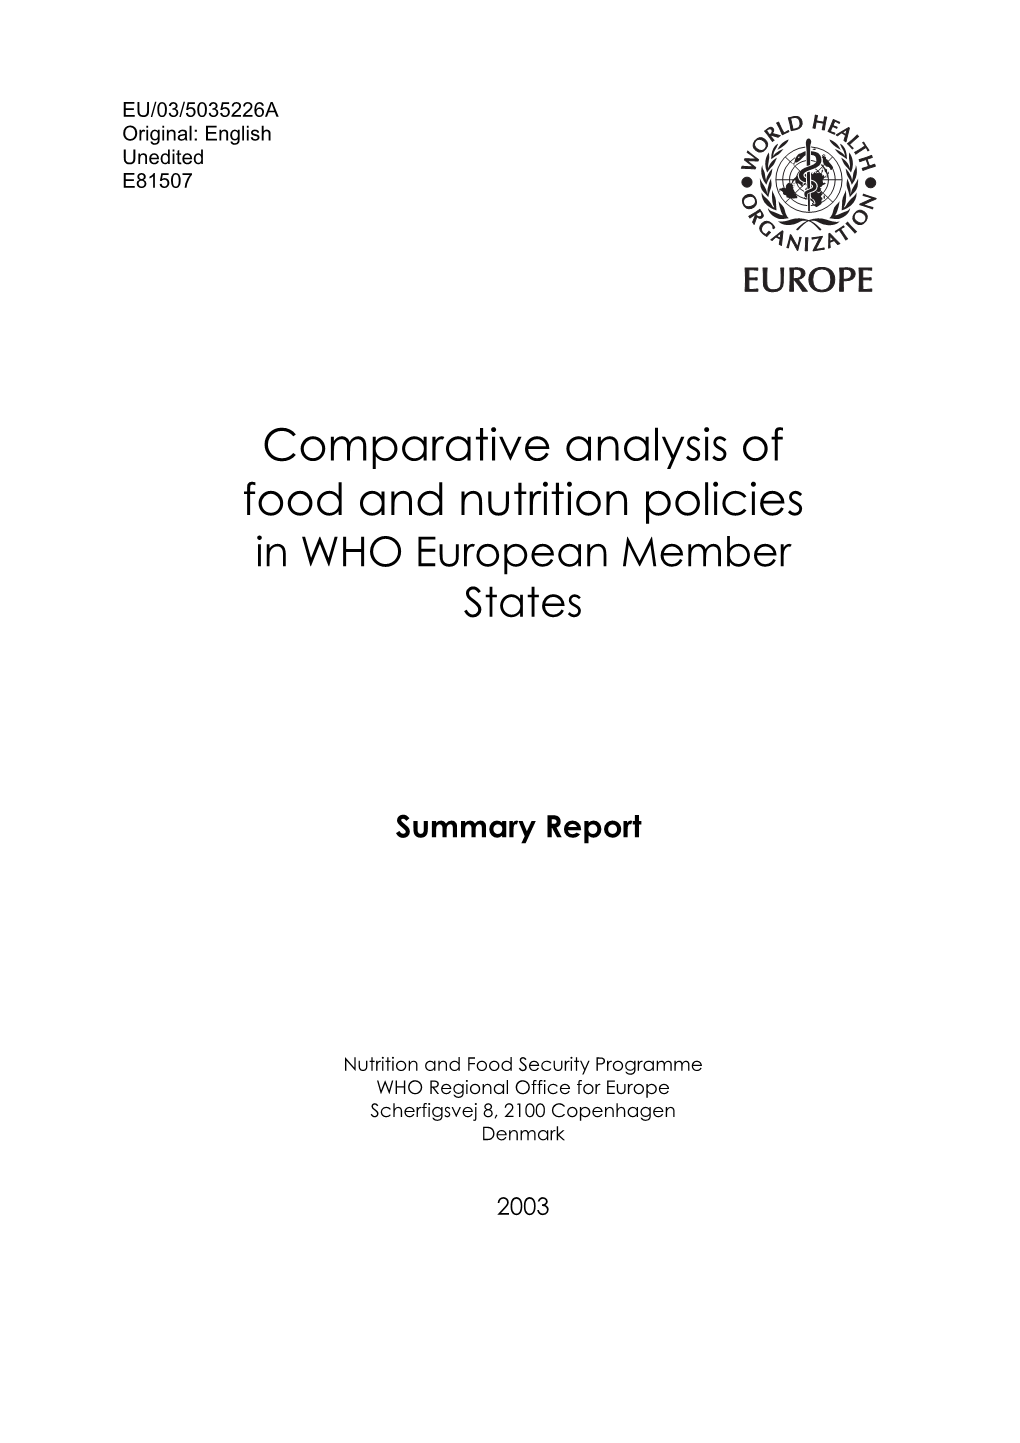 Comparative Analysis of Food and Nutrition Policies in WHO European Member States